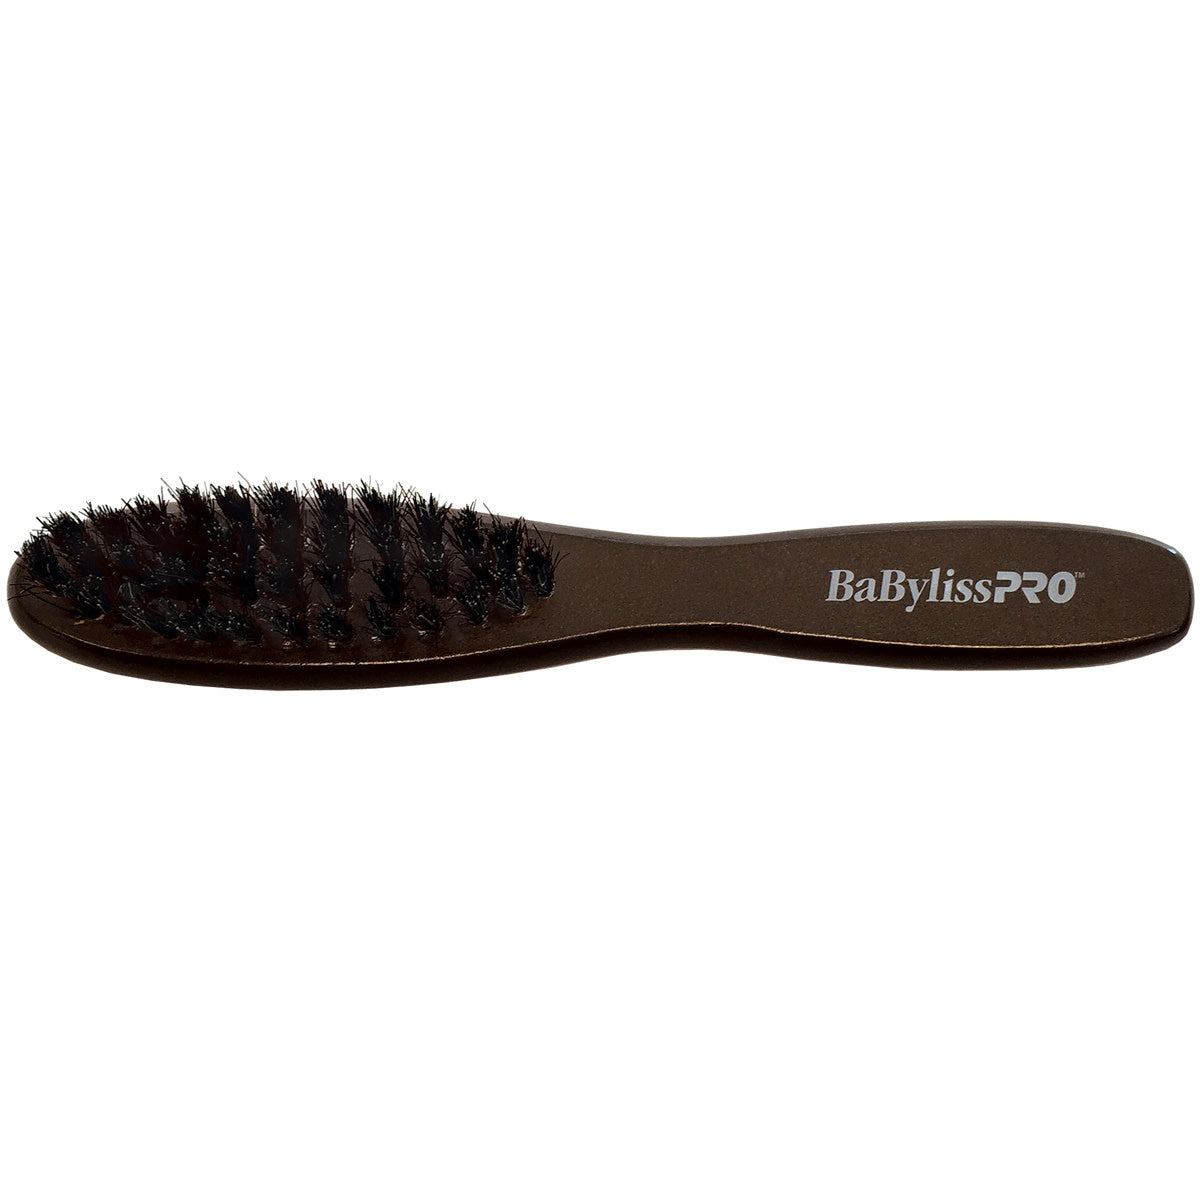 BABYLISS pro 4-row 6-1/2" beard brush with 100% soft  natural boar bristles